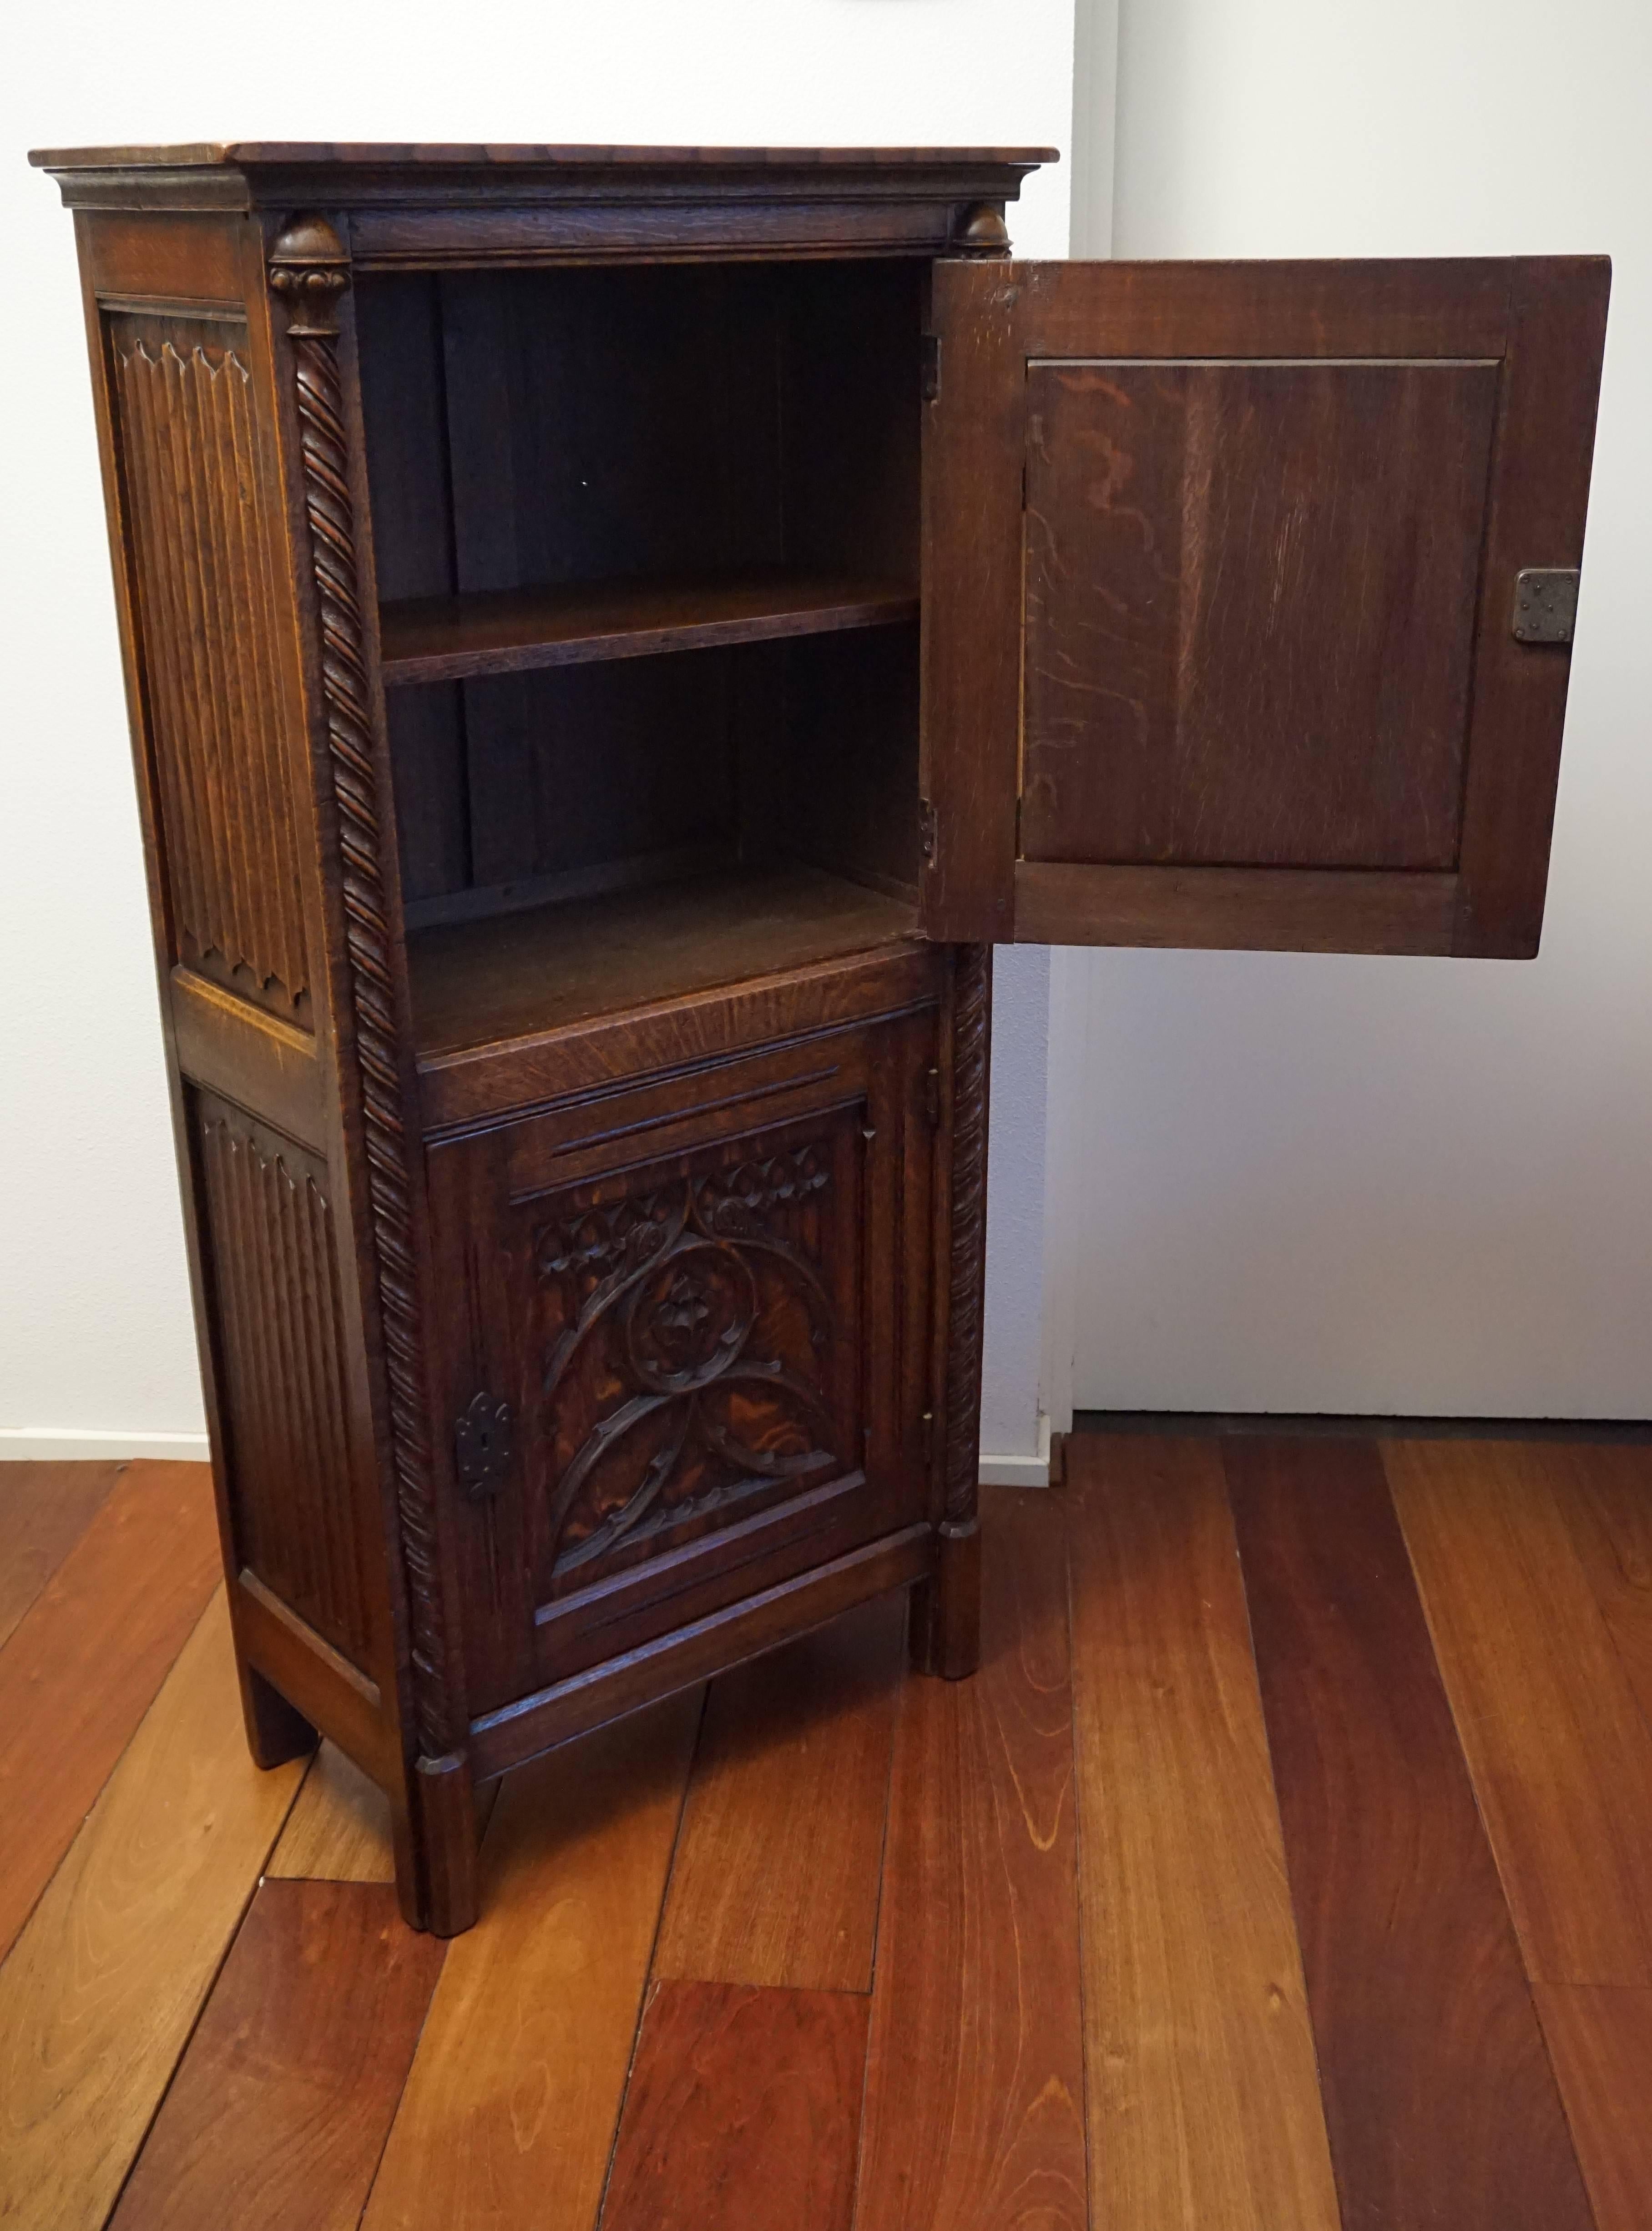 Dutch Gothic Revival Bookcase Carved Antique Cabinet with Wrought Iron Lock Plates